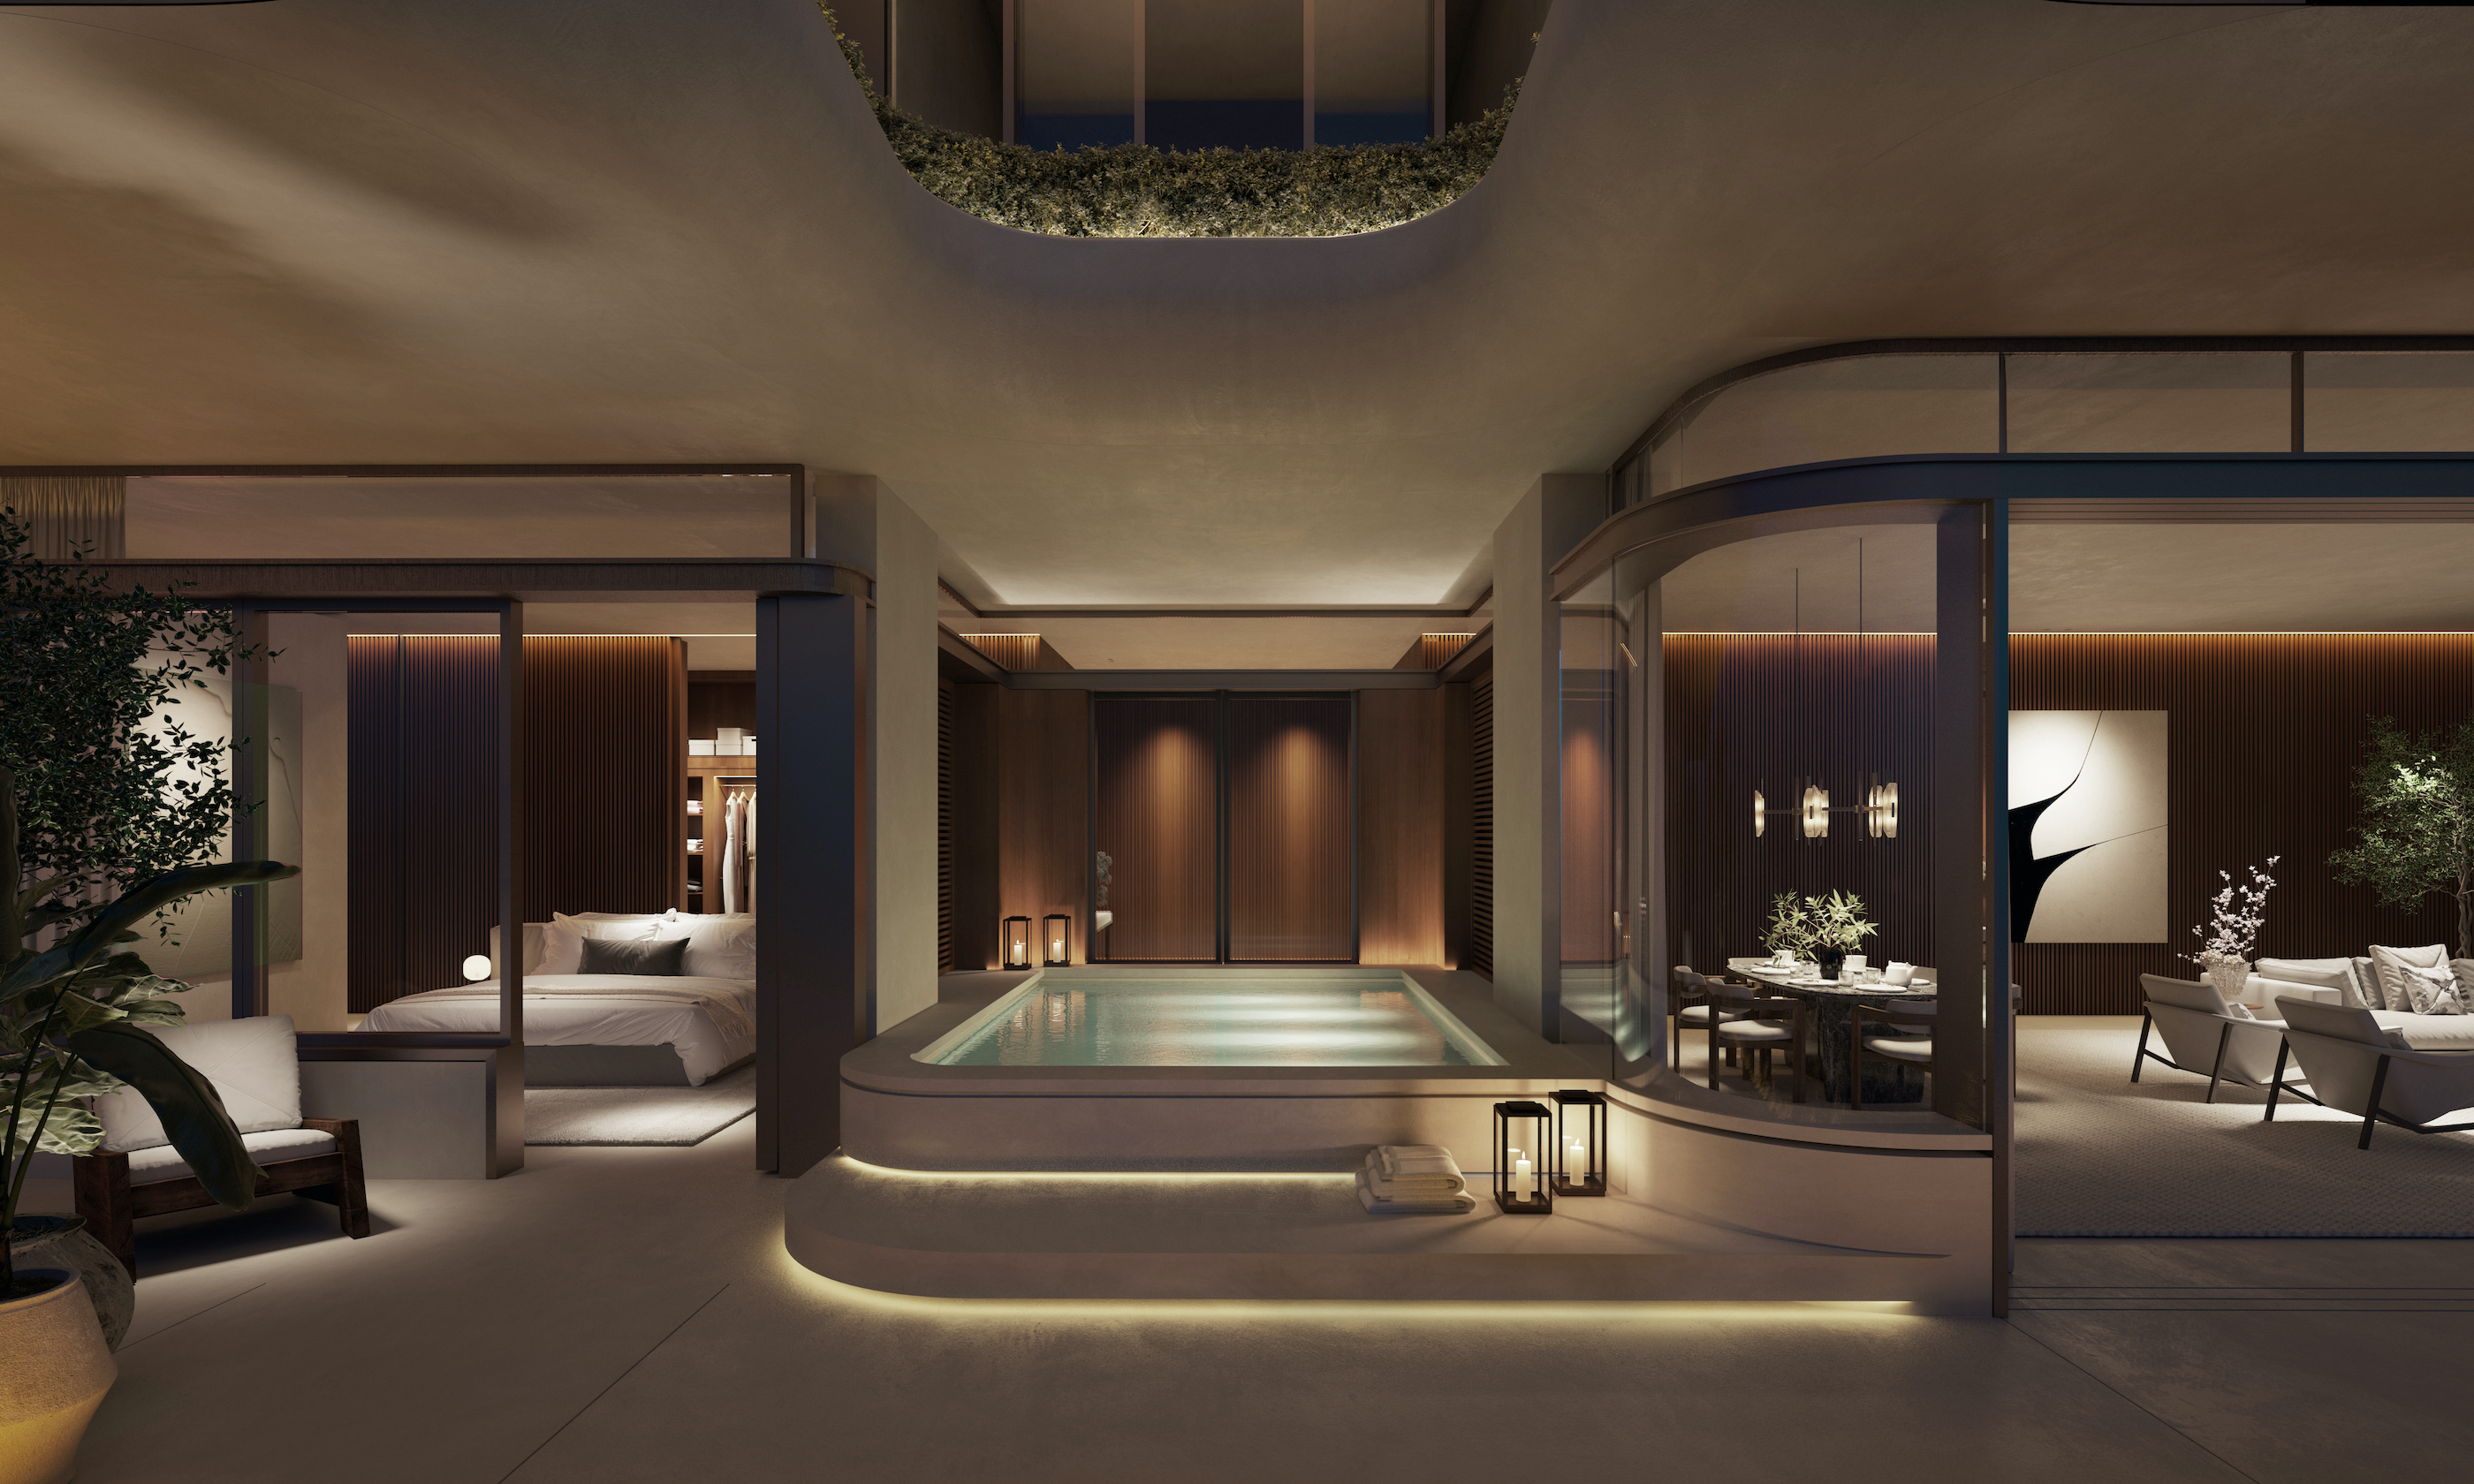 rendering of a luxury hotel suite looking from outside